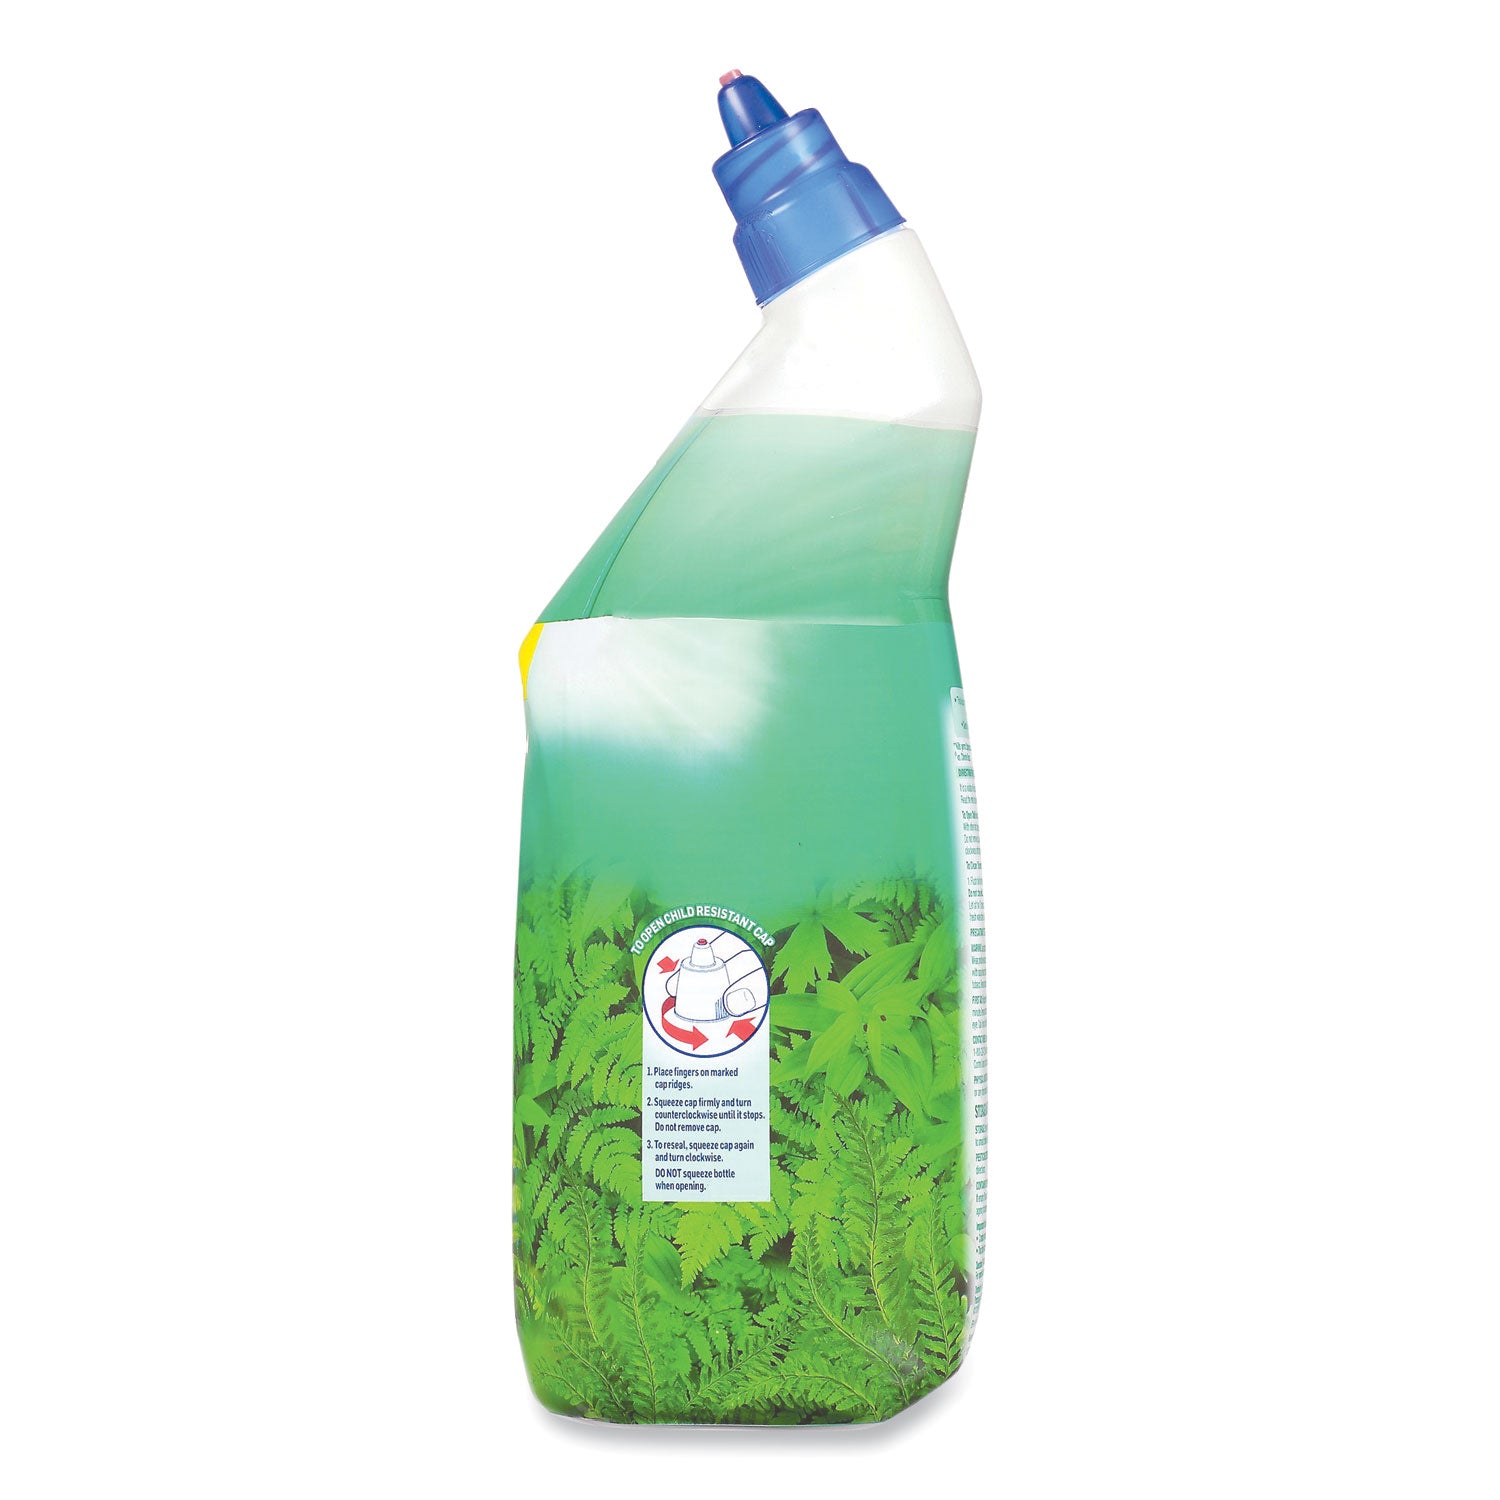 cling-and-fresh-toilet-bowl-cleaner-forest-rain-scent-24-oz-2-pack_rac98015pk - 3